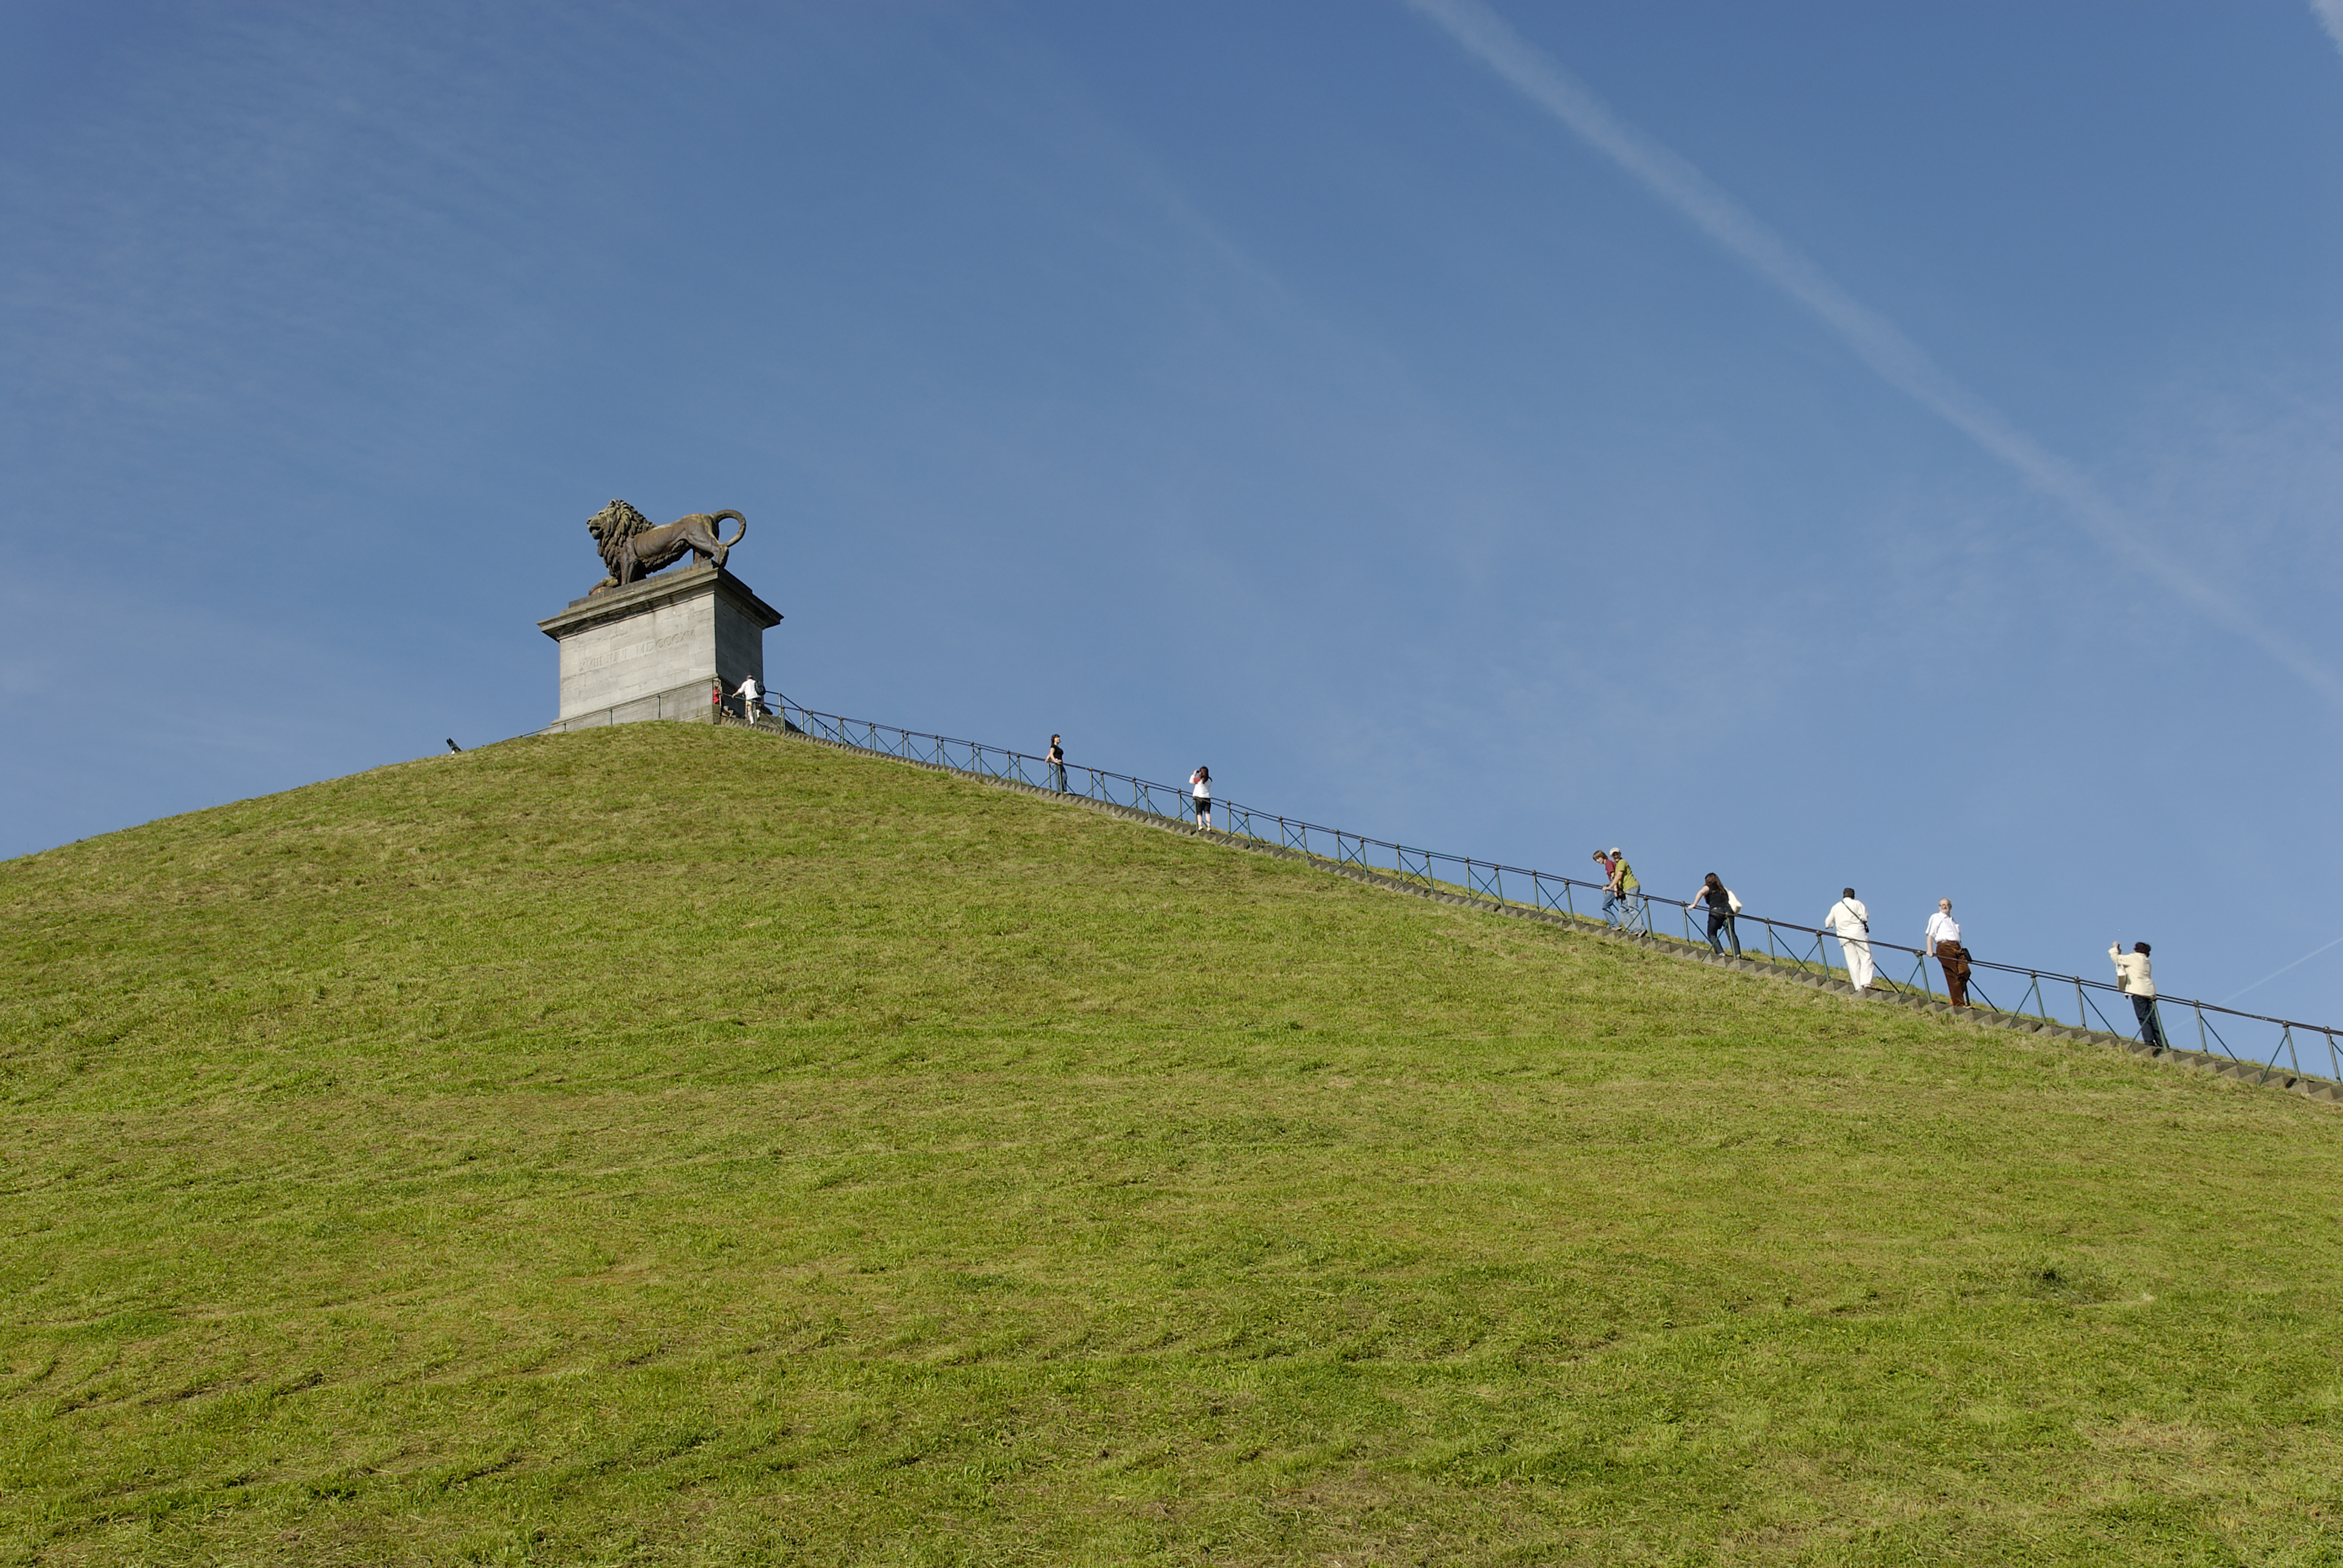 Discover the Lion's Mound, a historical monument commemorating the battle of Waterloo